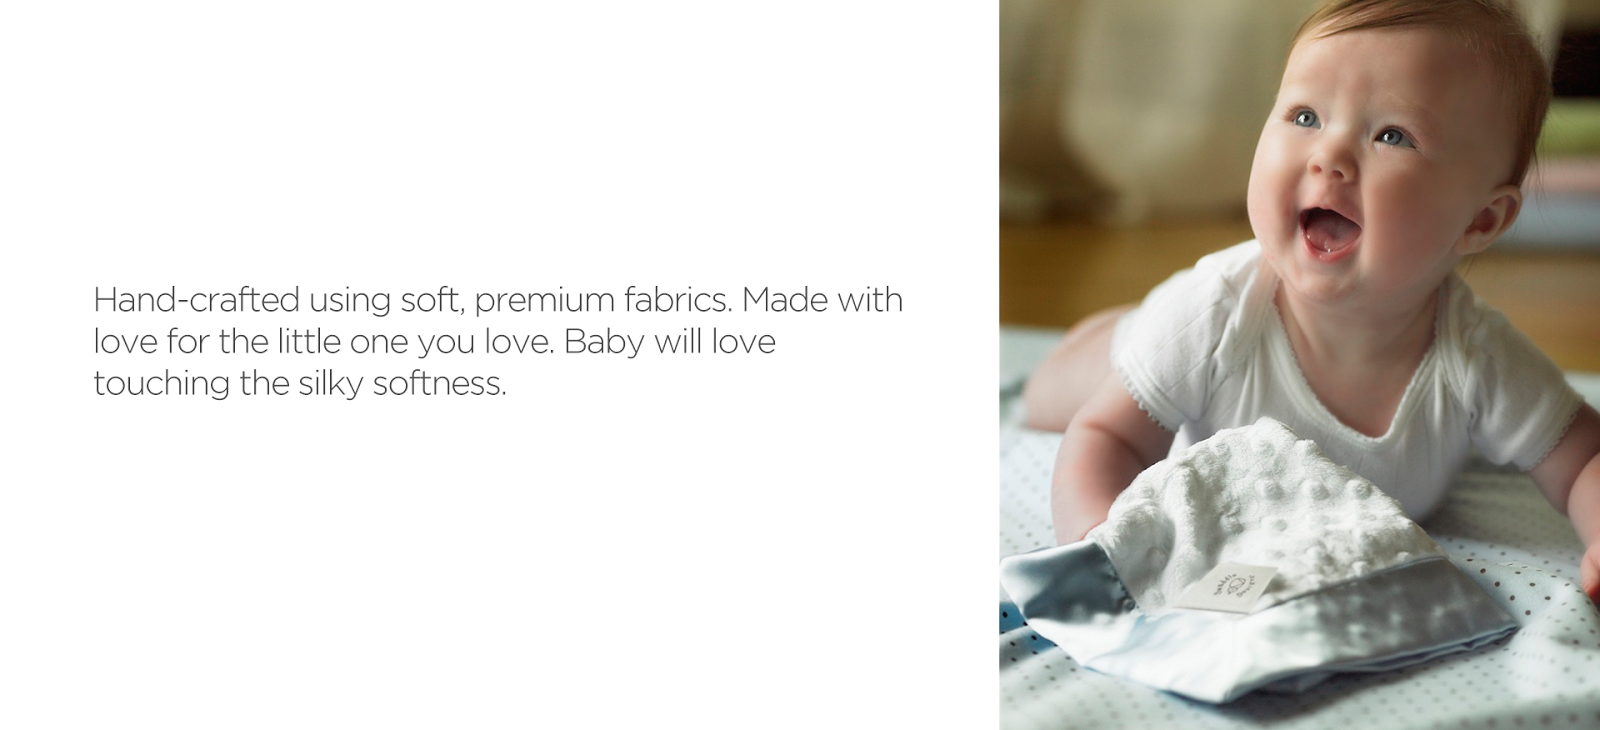 http://swaddledesignsph.blogspot.com/p/baby-lovie-is-small-security-blankie.html